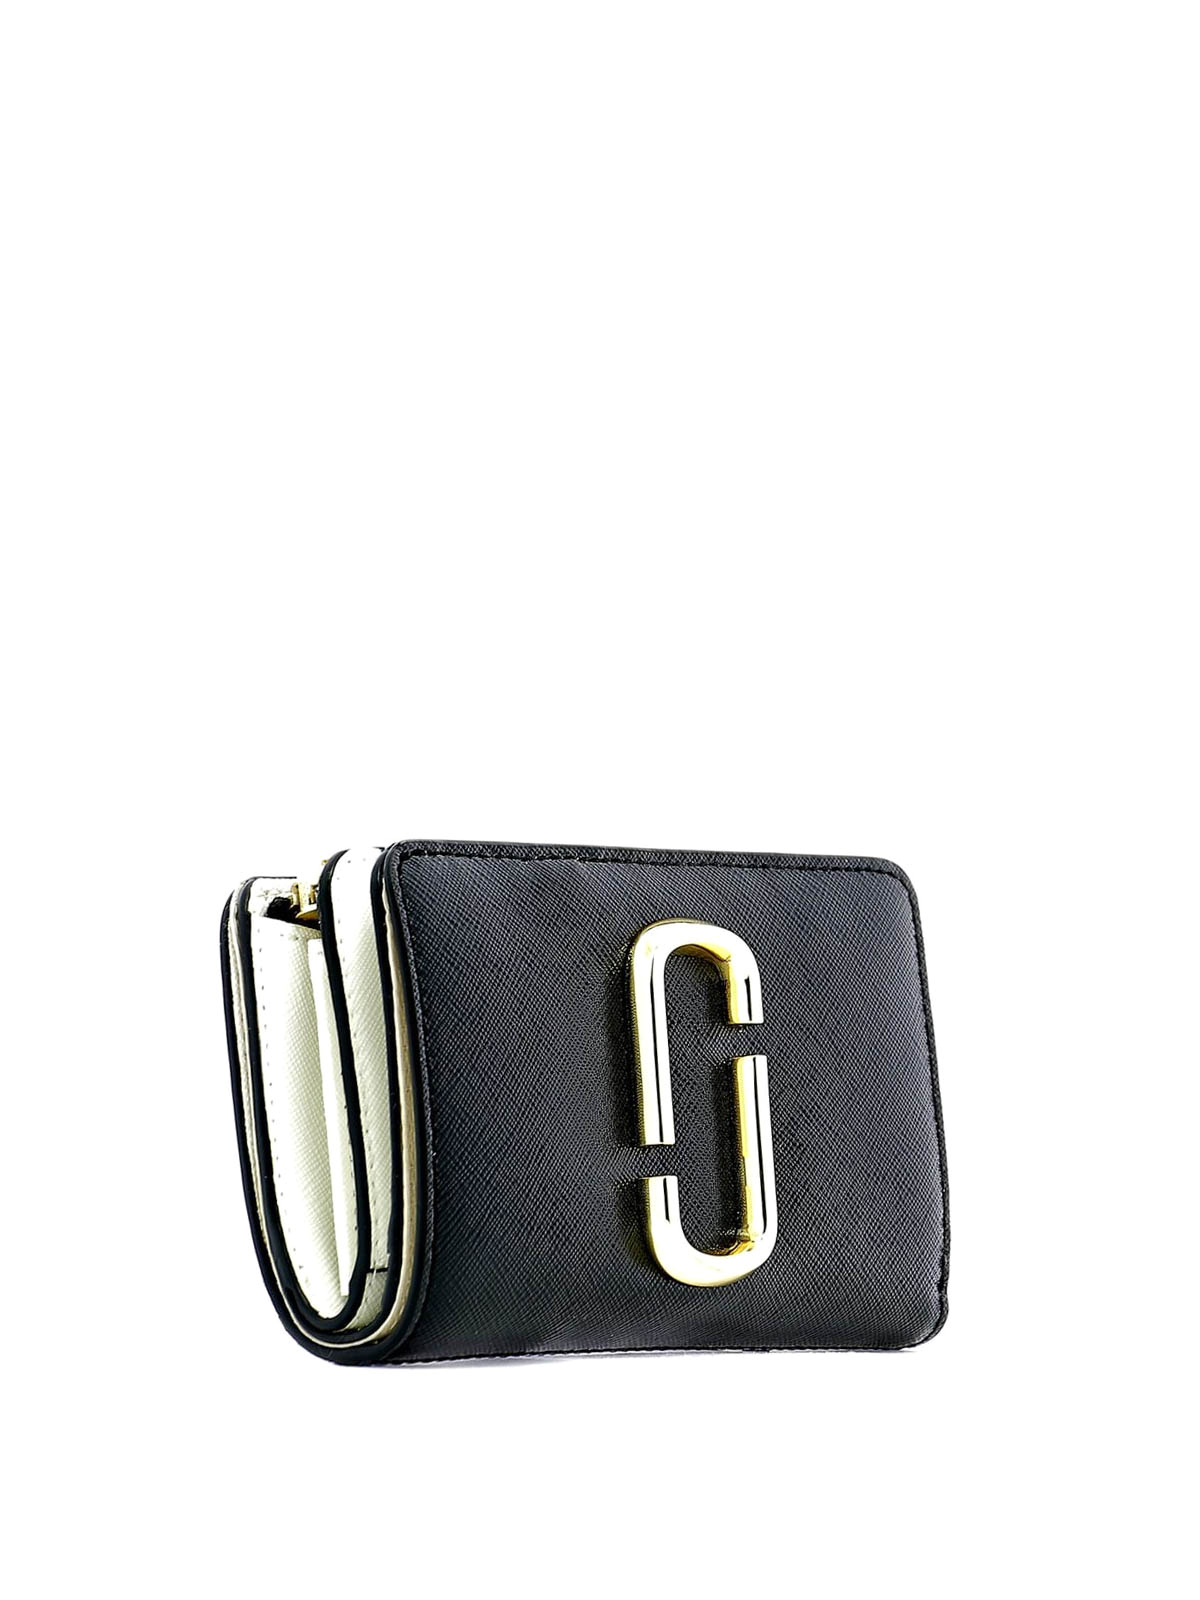 Snapshot black and white saffiano wallet